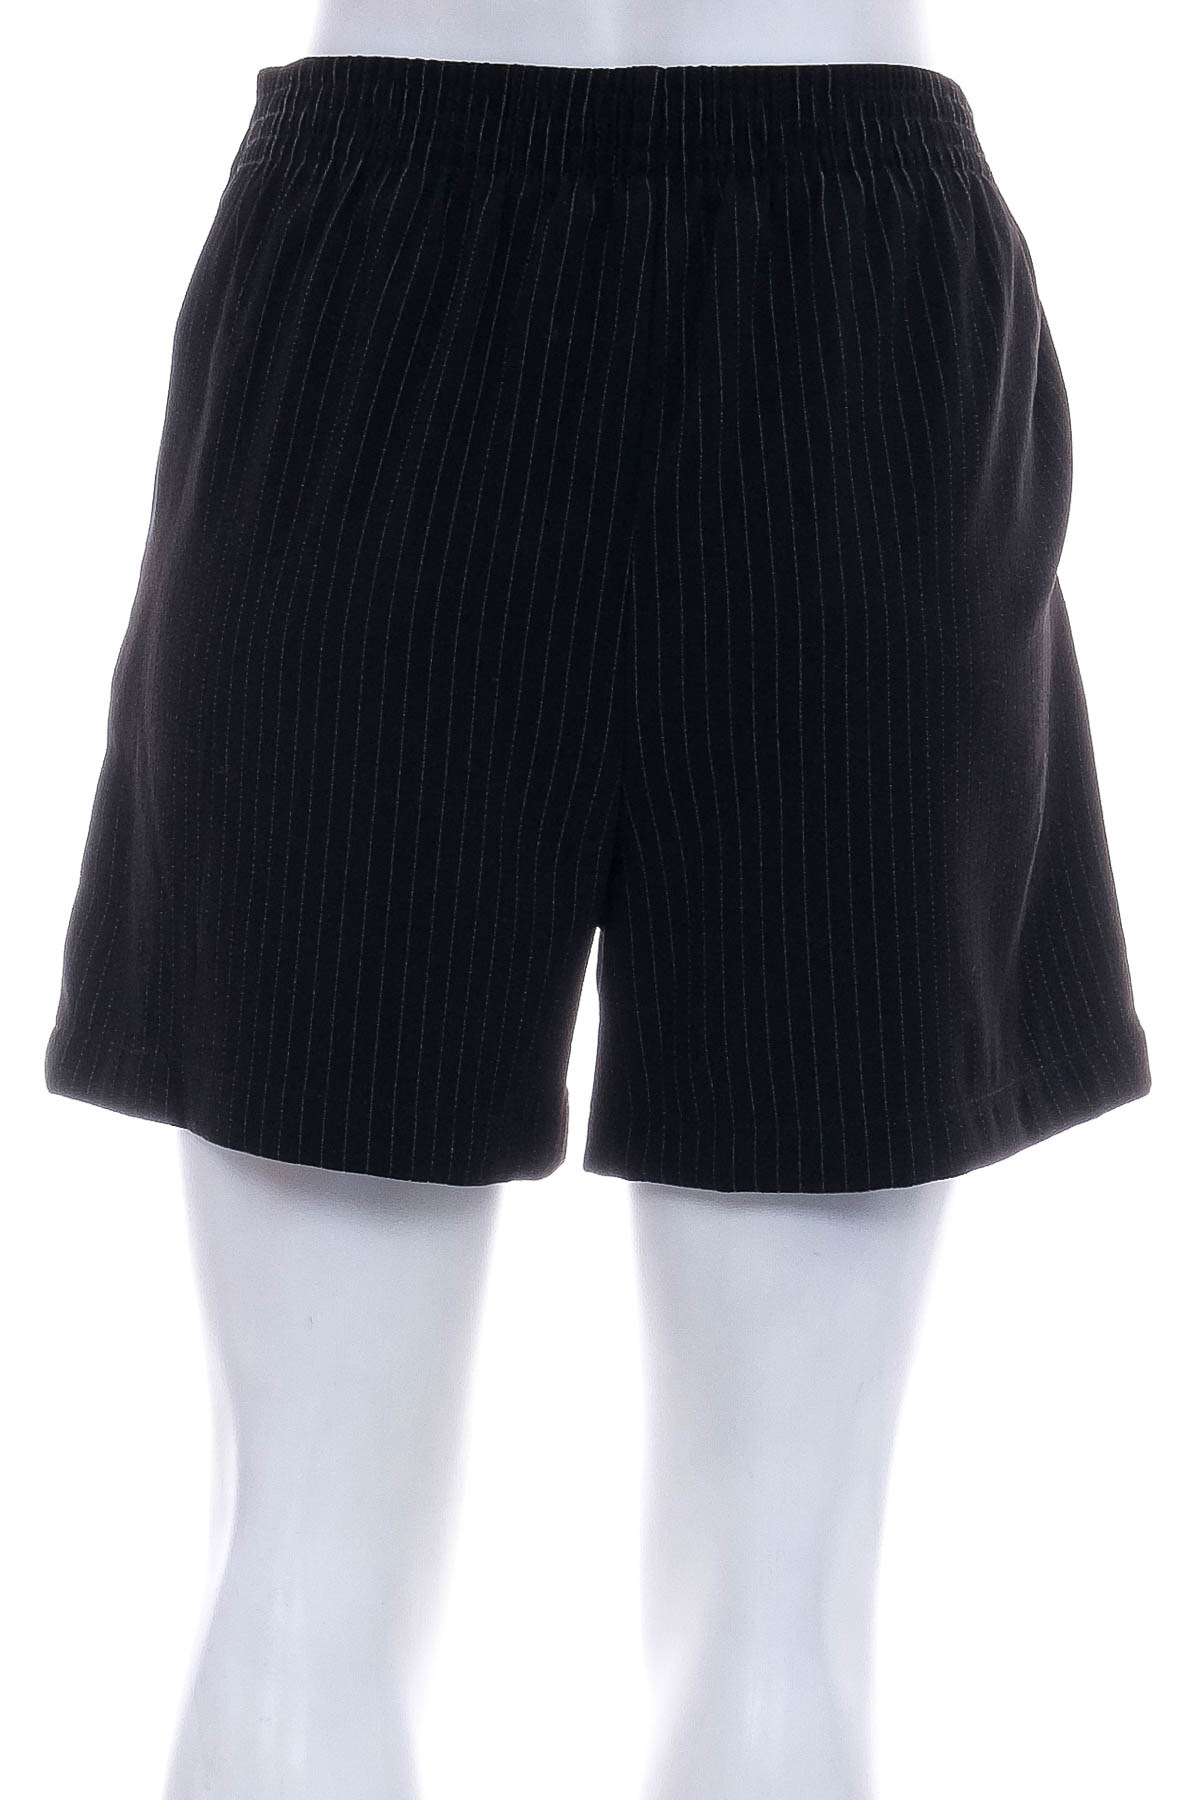 Female shorts - PIGALLE - 1